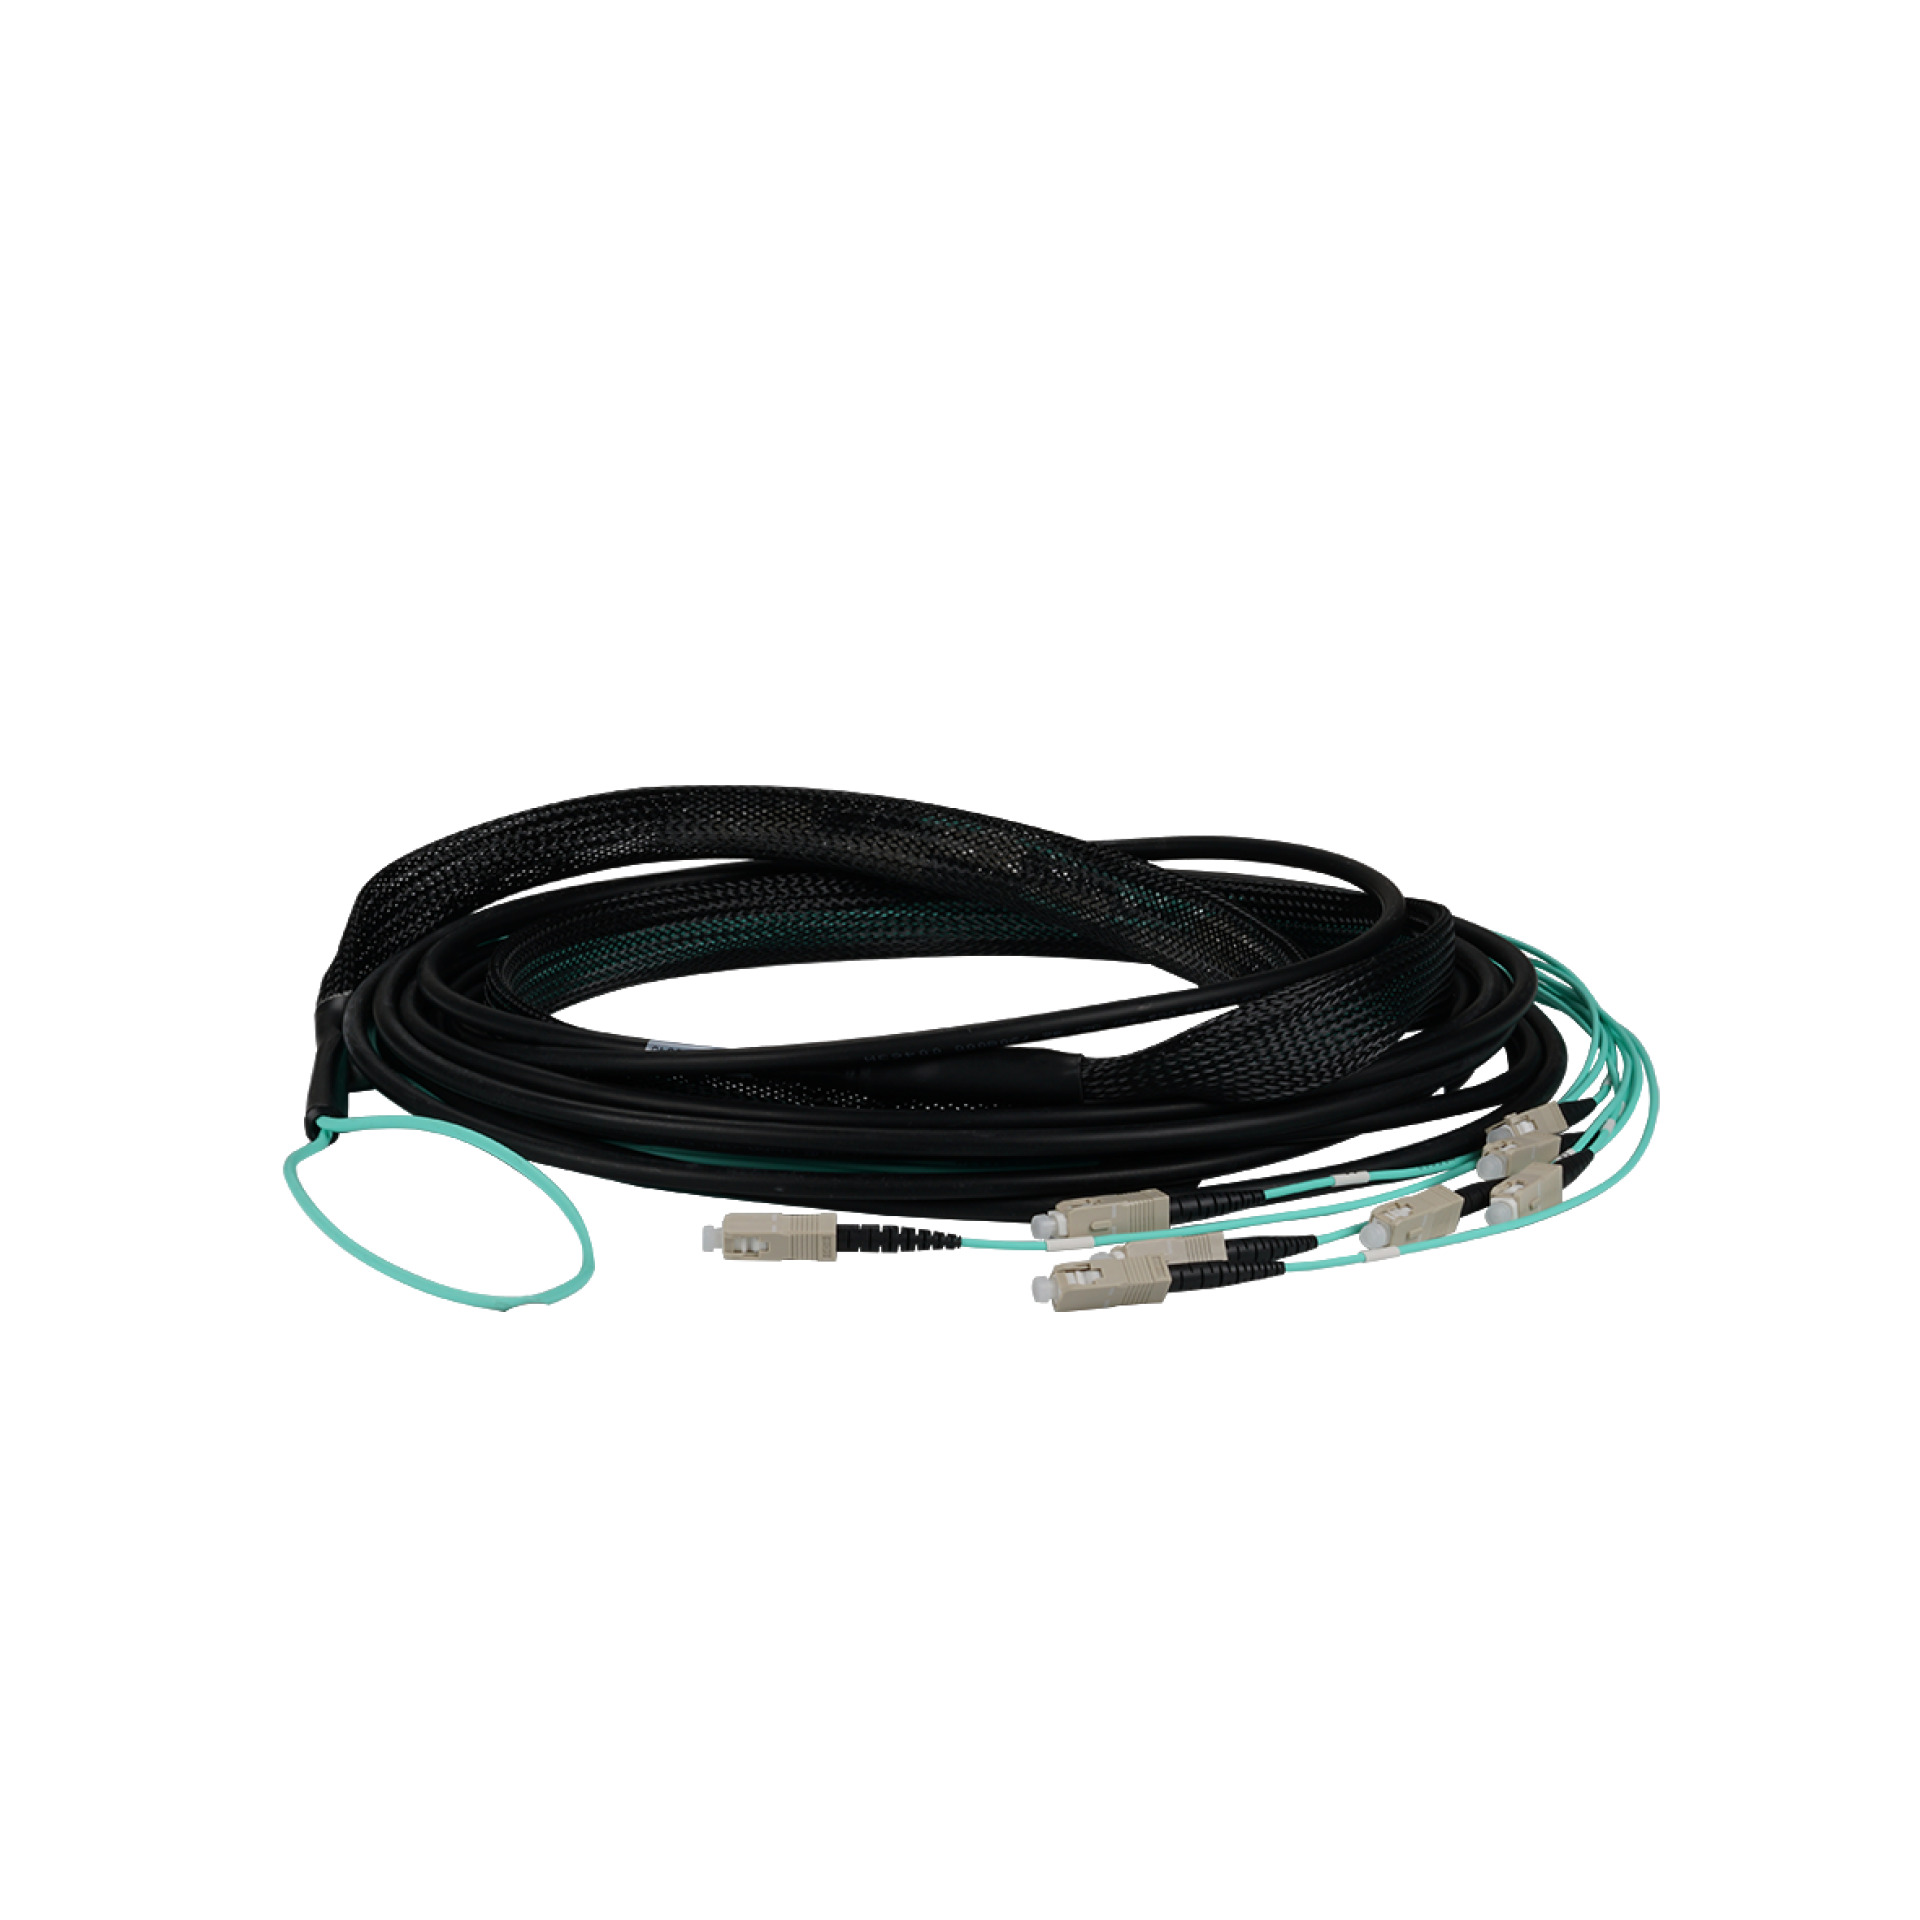 Trunk cable U-DQ(ZN)BH 8G 50/125, SC/SC OM3 10m